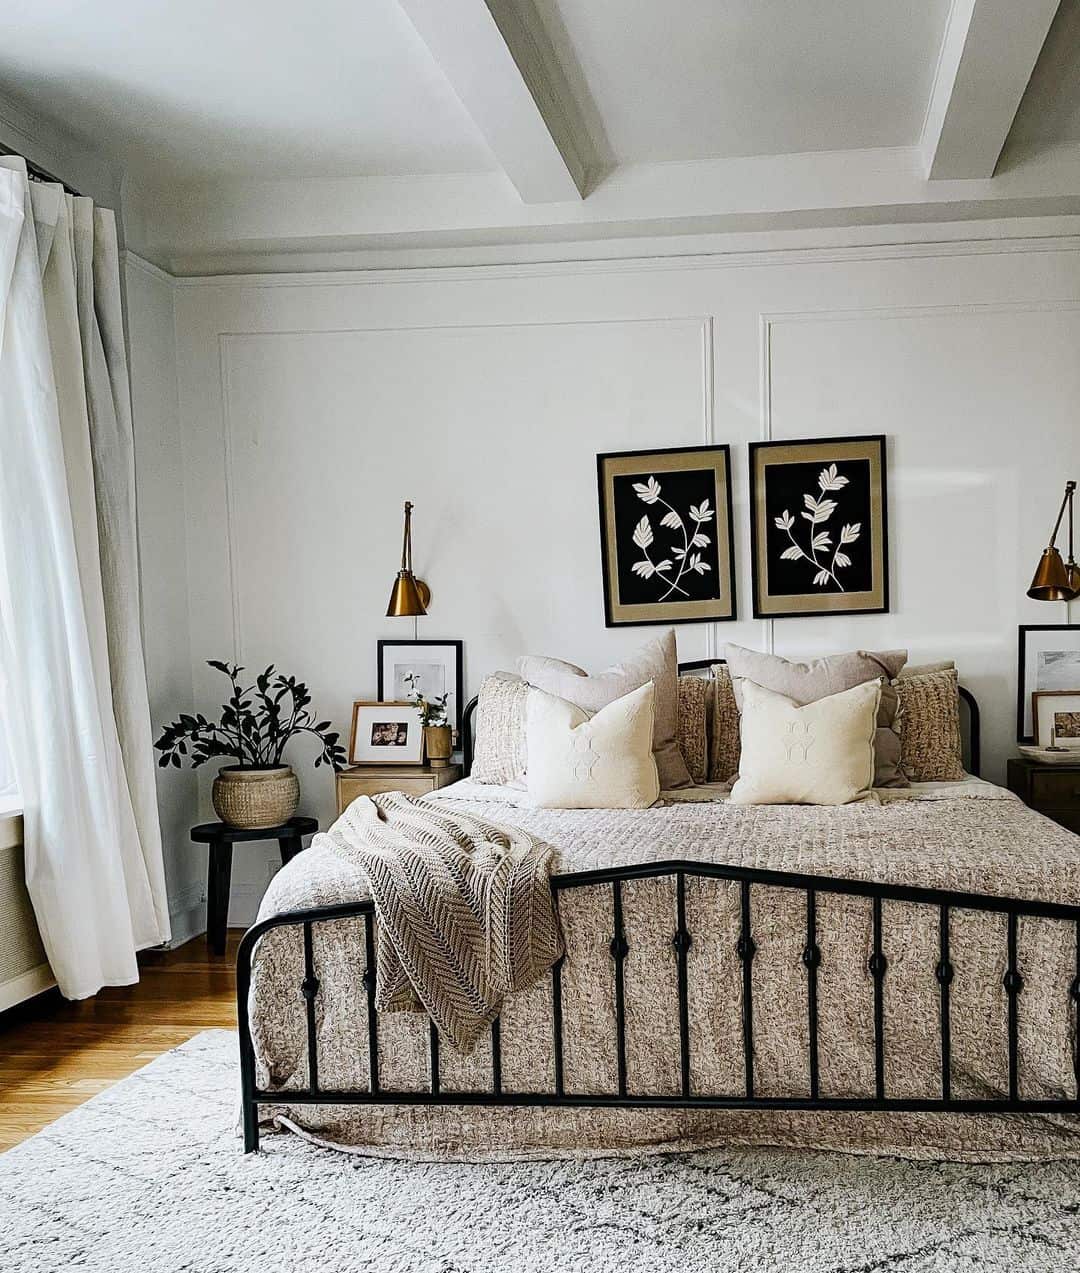 Neutral Botanical Bedroom With Wall Décor - Soul & Lane